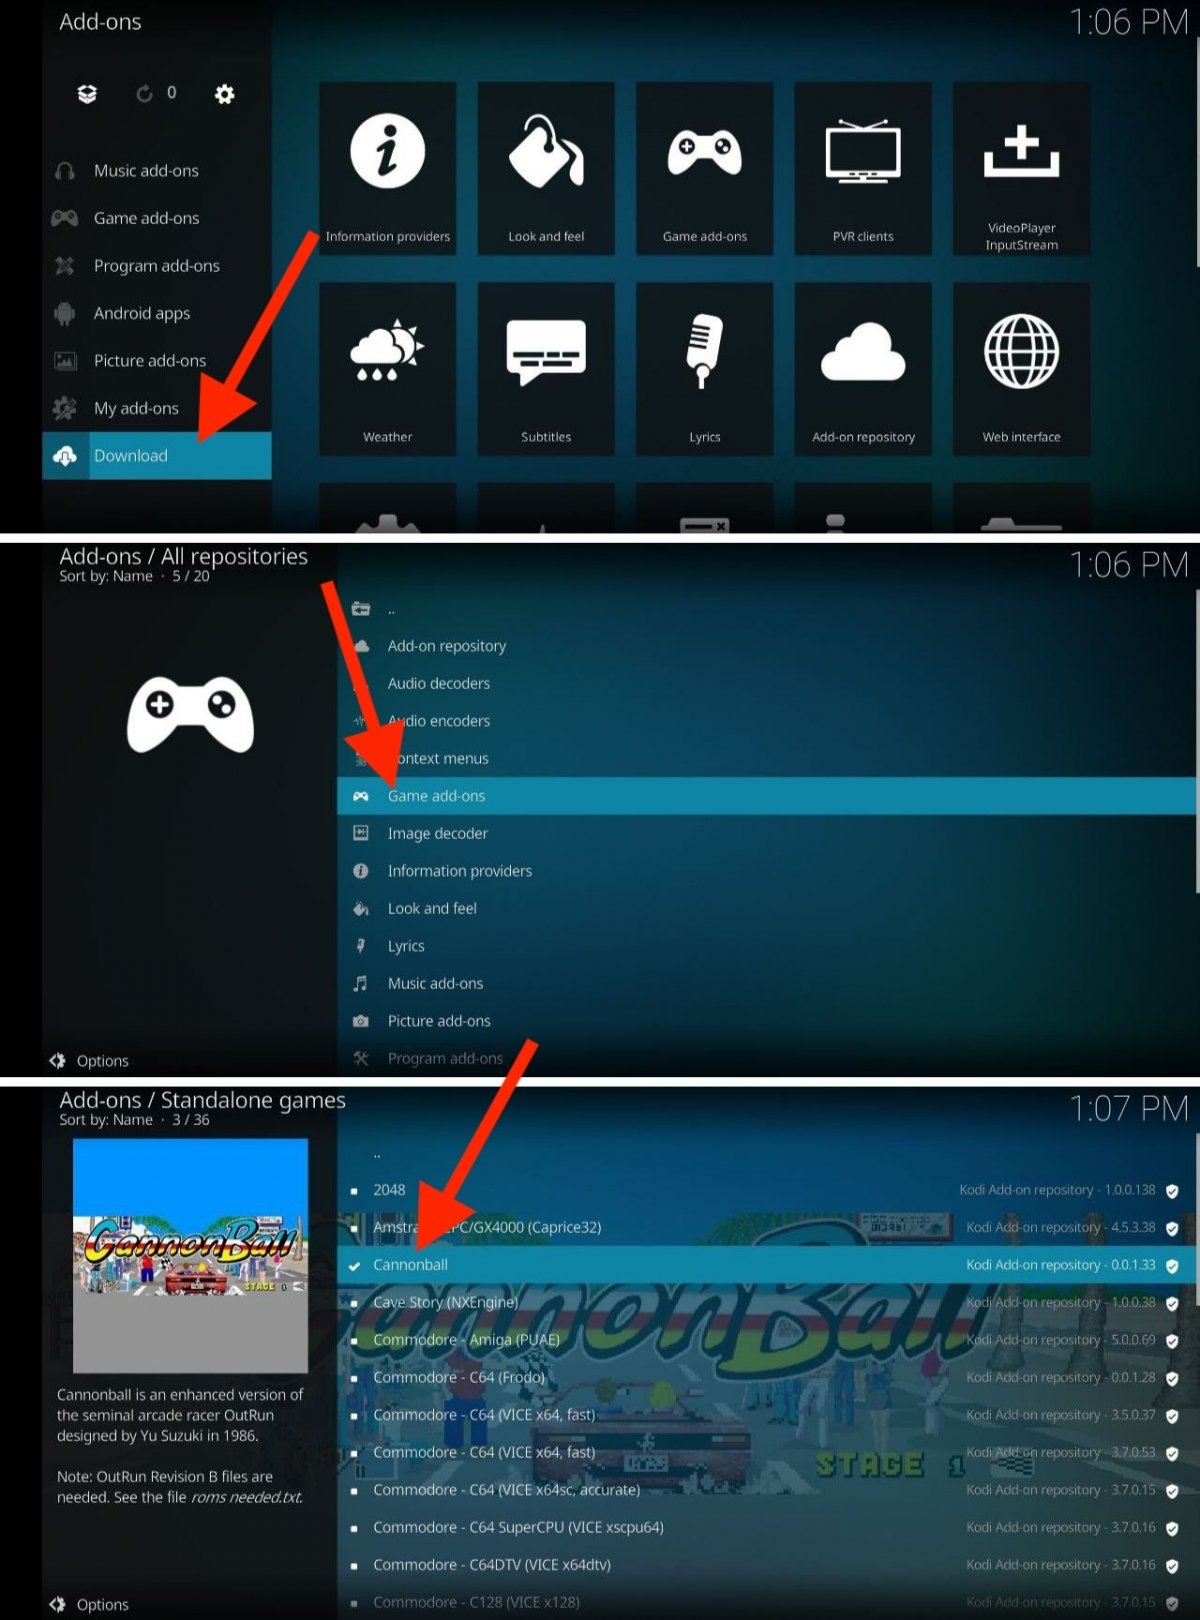 How to install games on Kodi, step by step